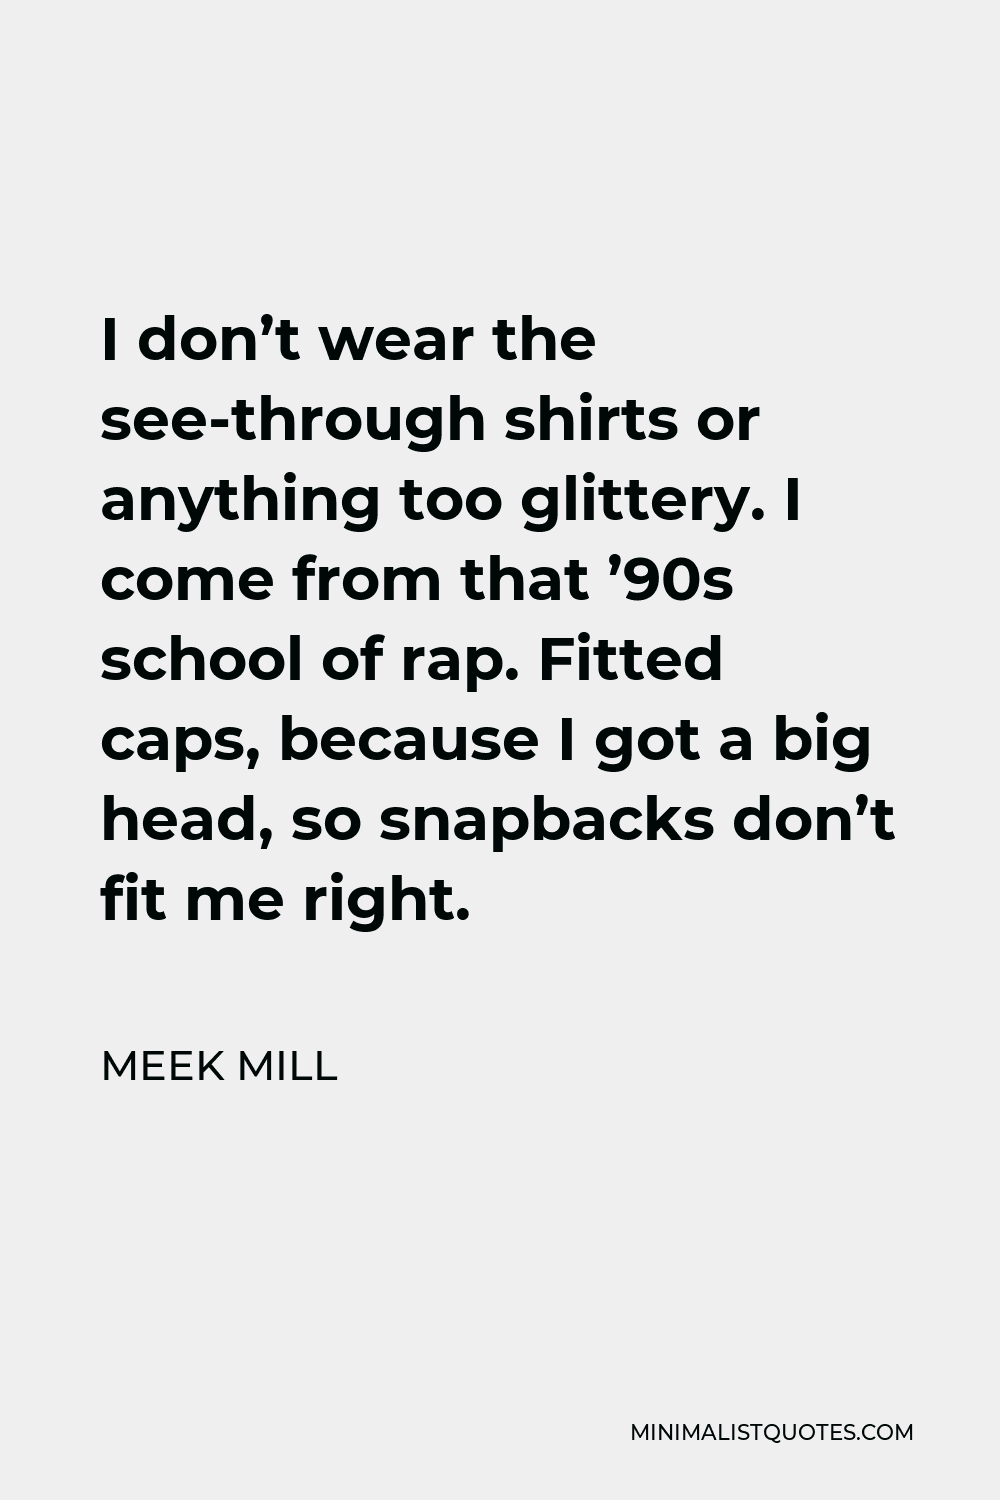 Meek Mill Quote - I don’t wear the see-through shirts or anything too glittery. I come from that ’90s school of rap. Fitted caps, because I got a big head, so snapbacks don’t fit me right.